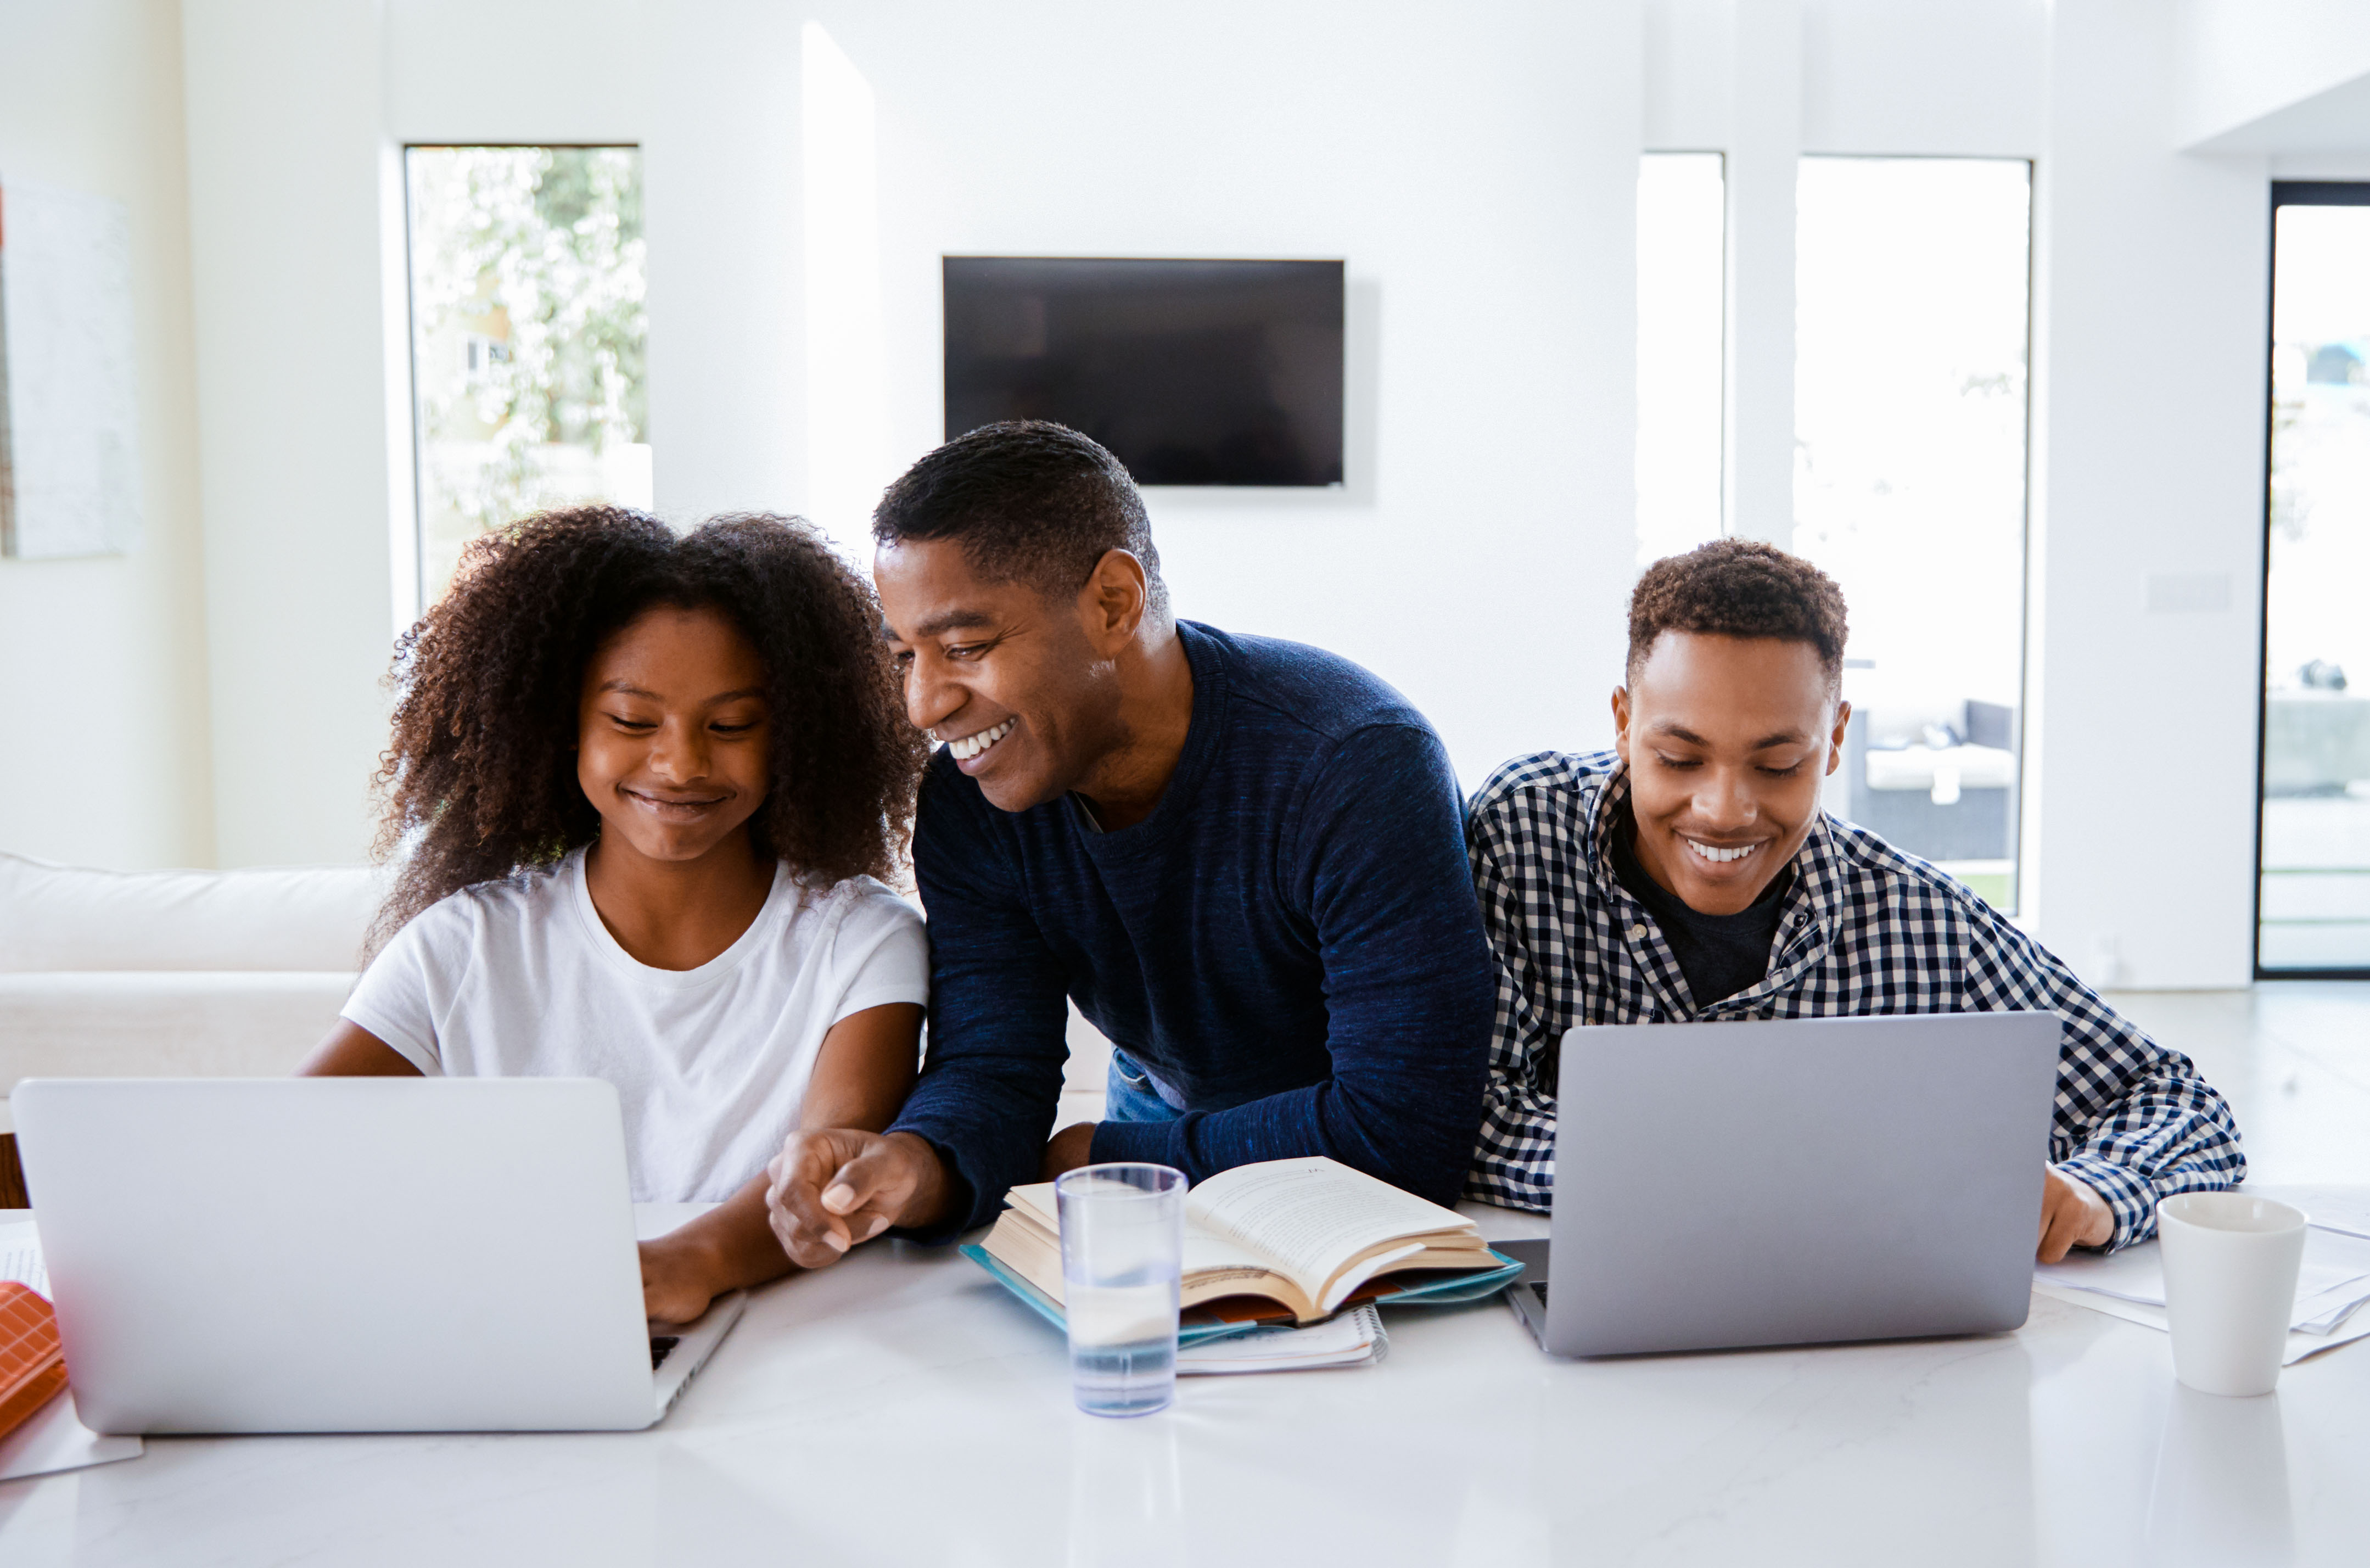 Parents Guide to Financial Literacy for Kids & Teens